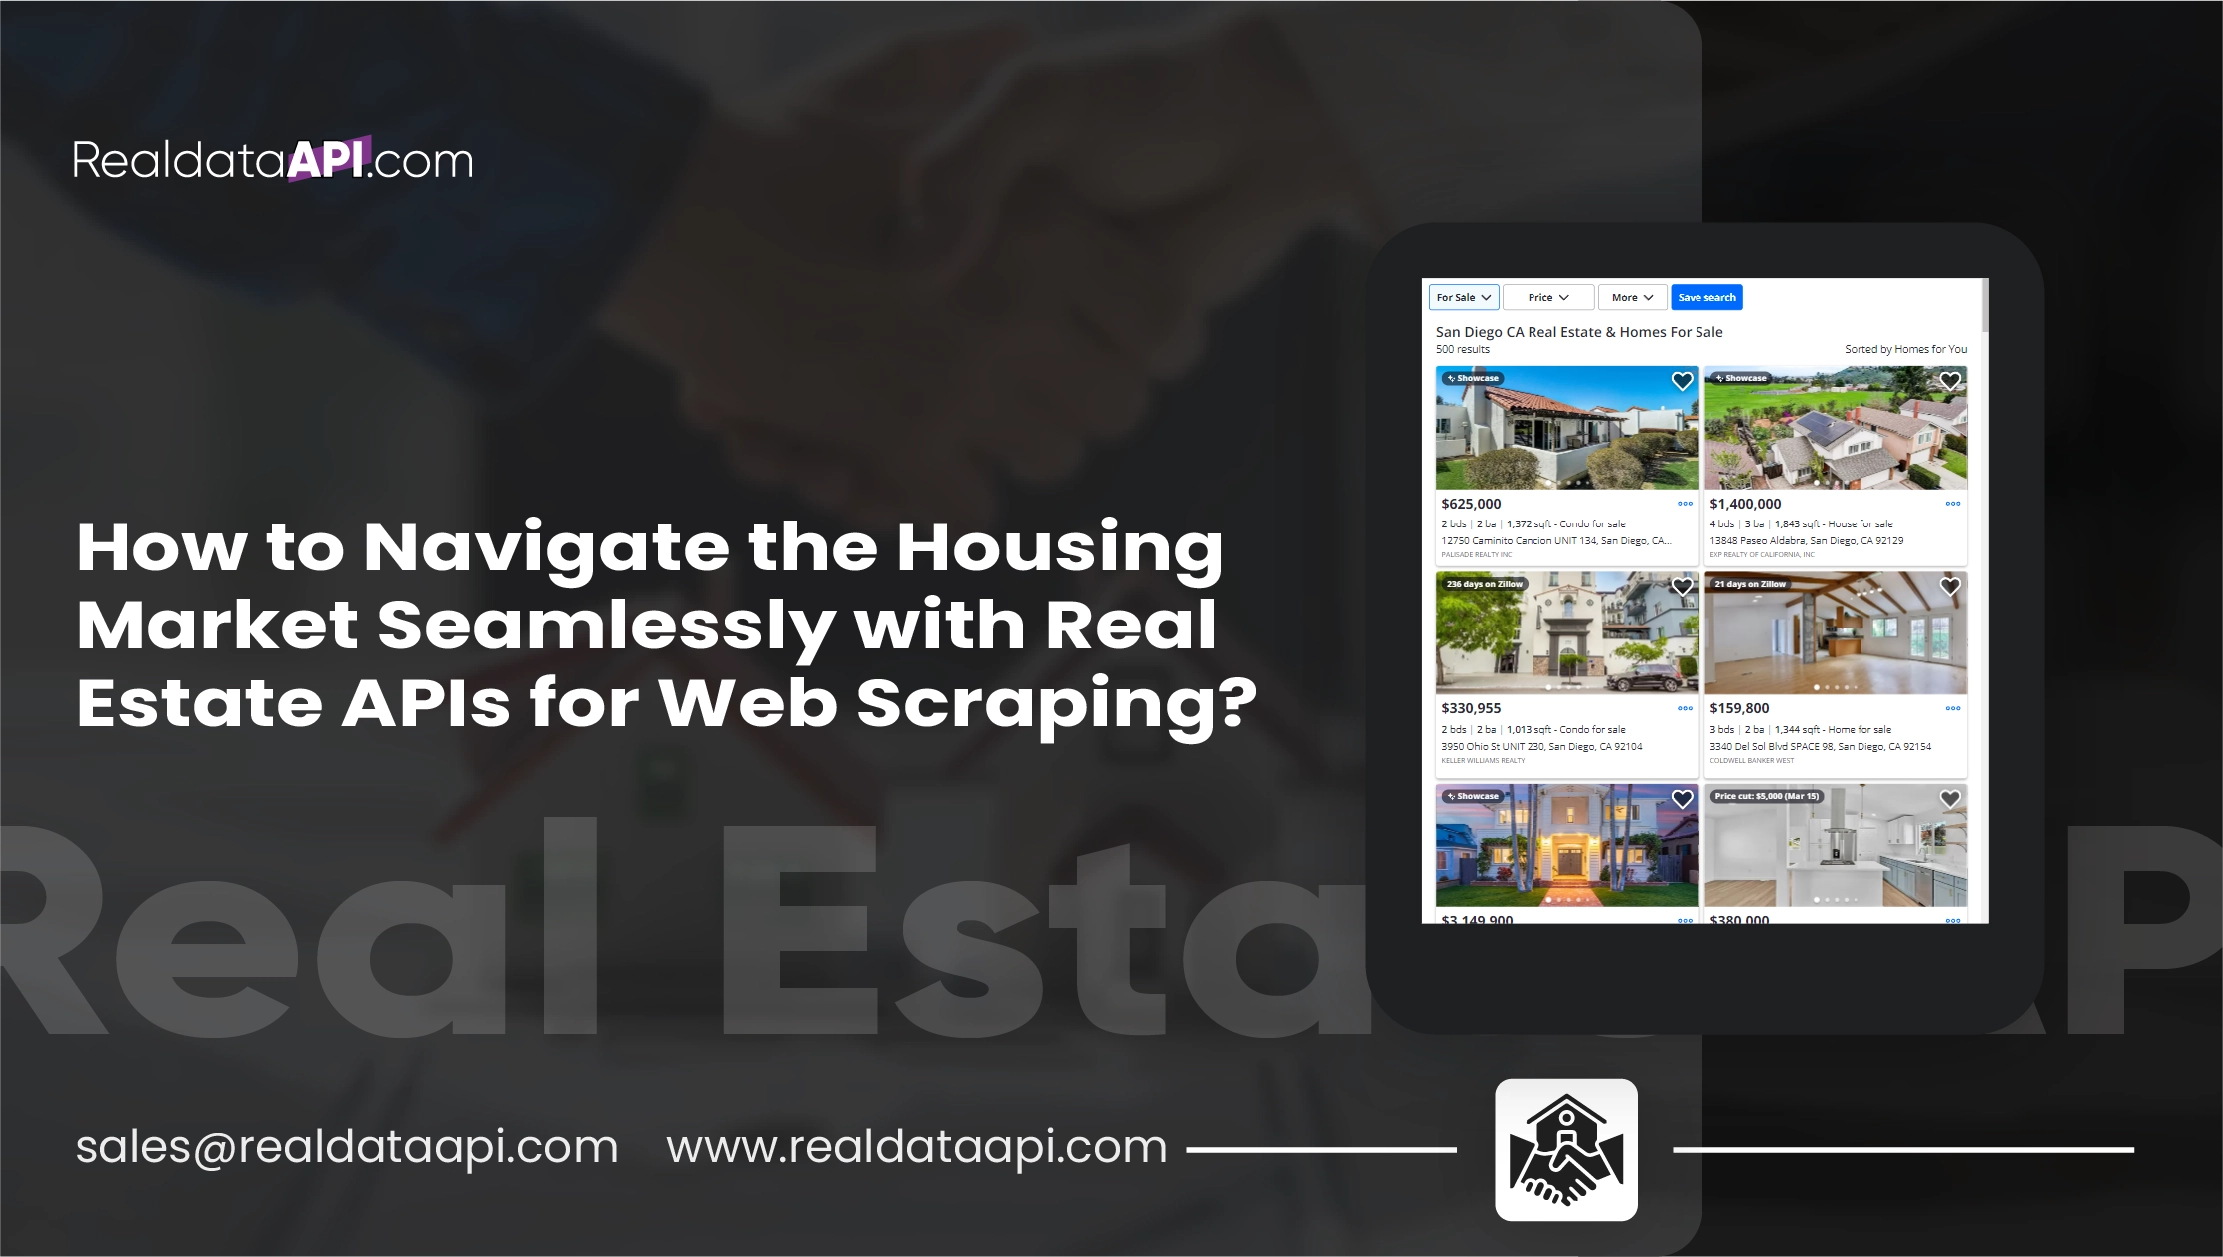 How-to-Navigate-the-Housing-Market-Seamlessly-with-Real-Estate-APIs-for-Web-Scraping-01